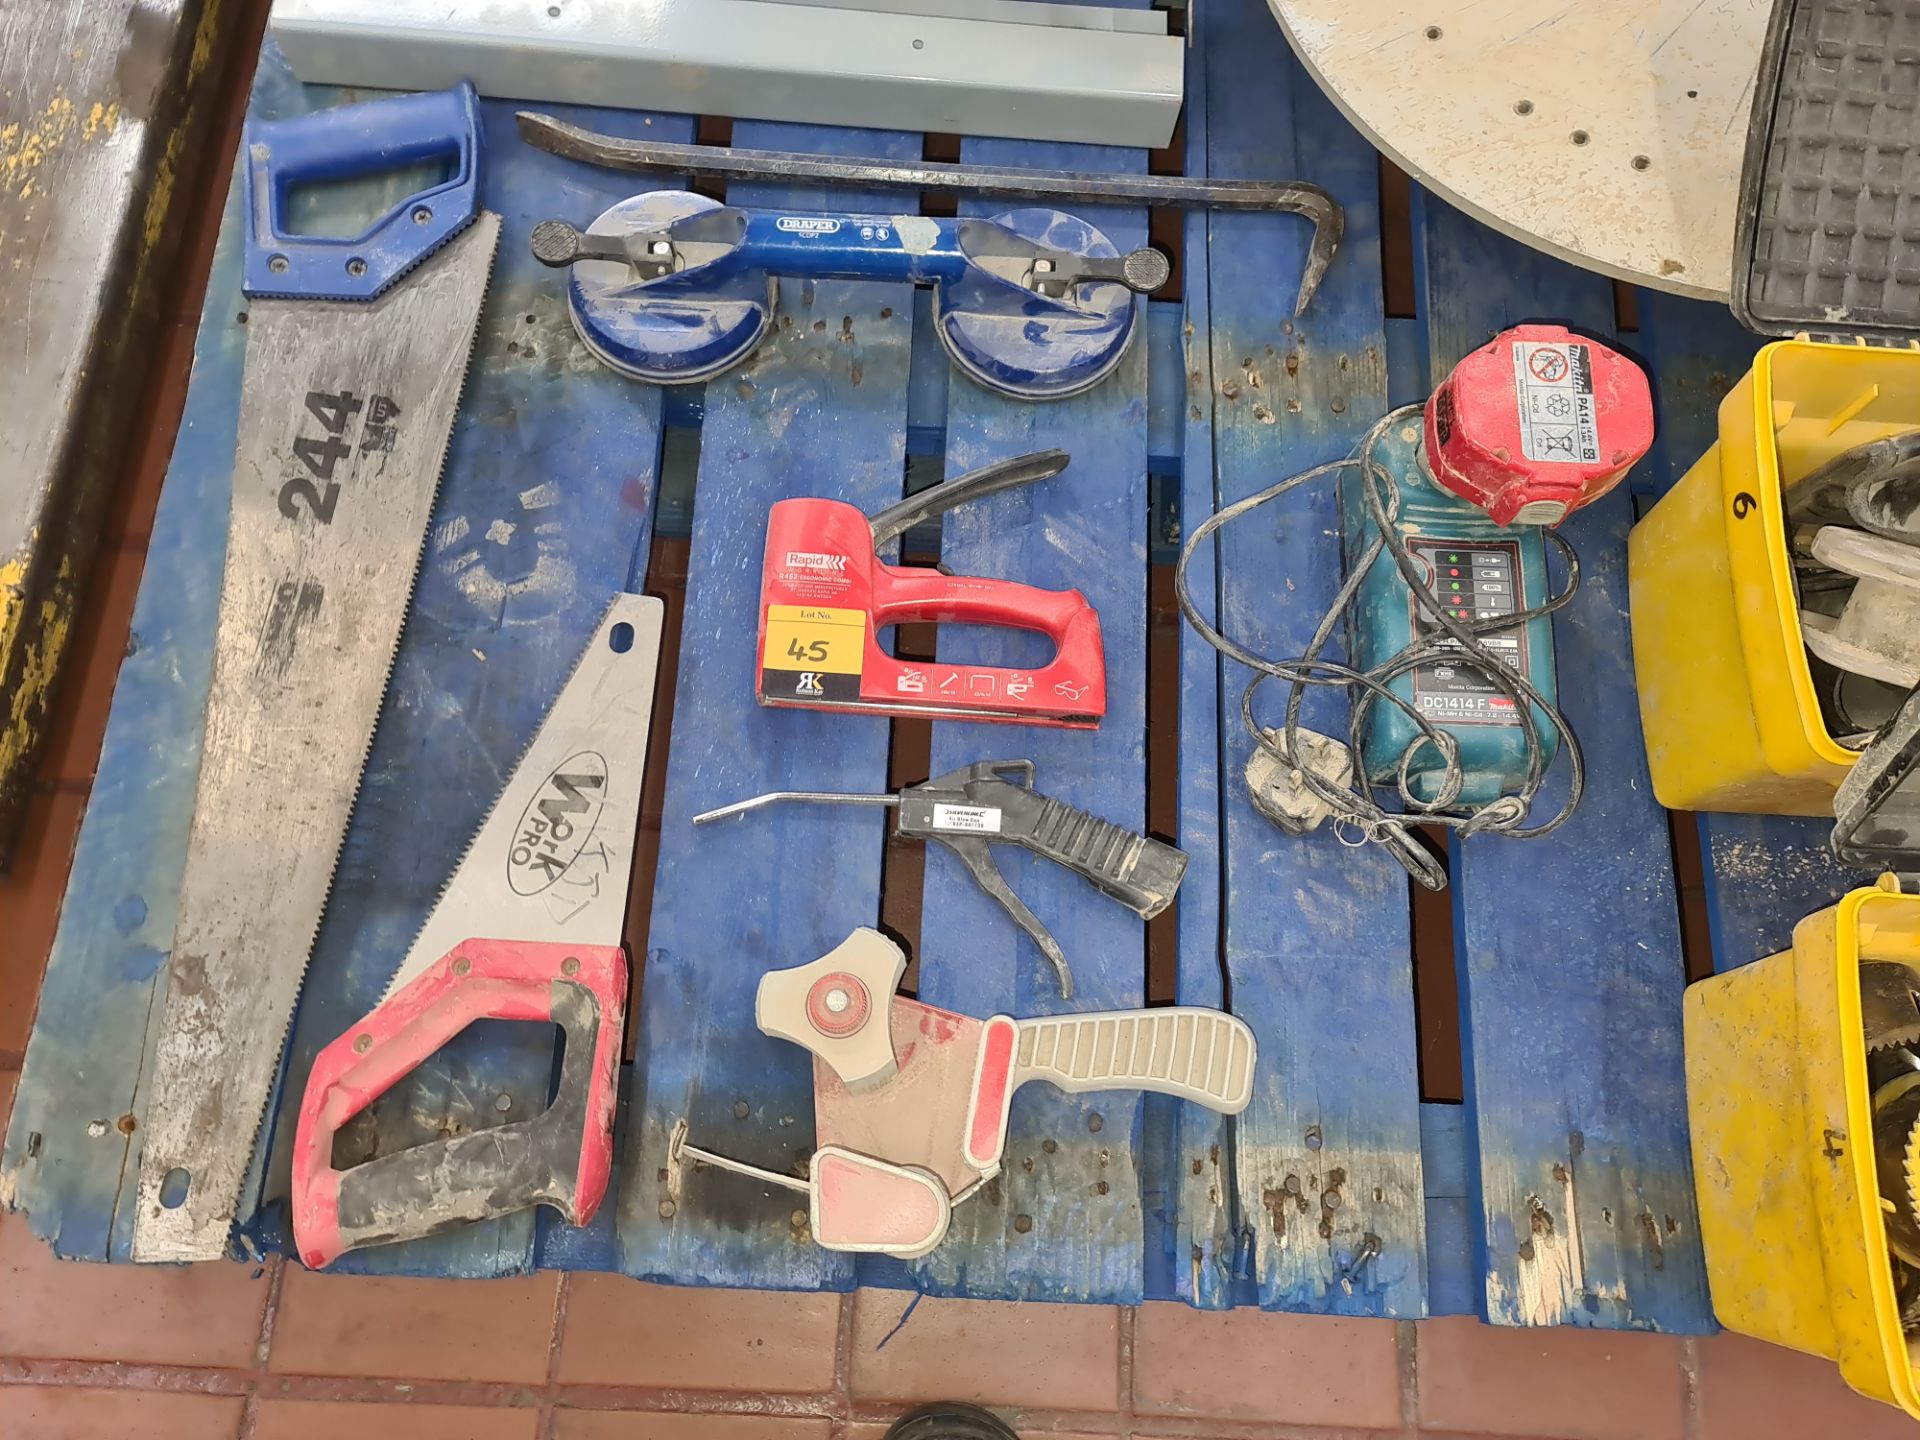 Contents of a pallet of miscellaneous items including hand tools, boring heads, handling equipment, - Image 2 of 6